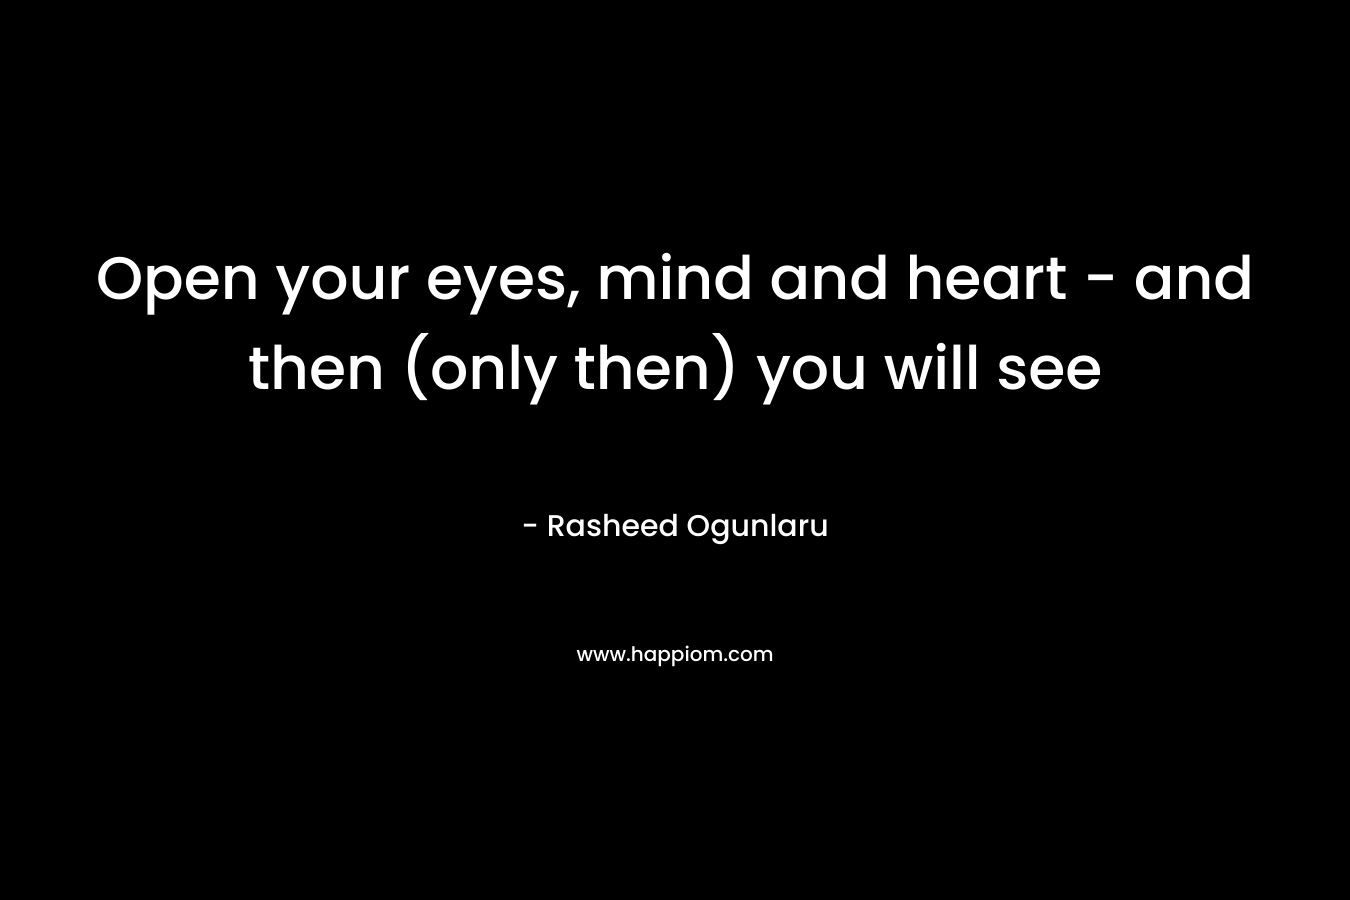 Open your eyes, mind and heart - and then (only then) you will see